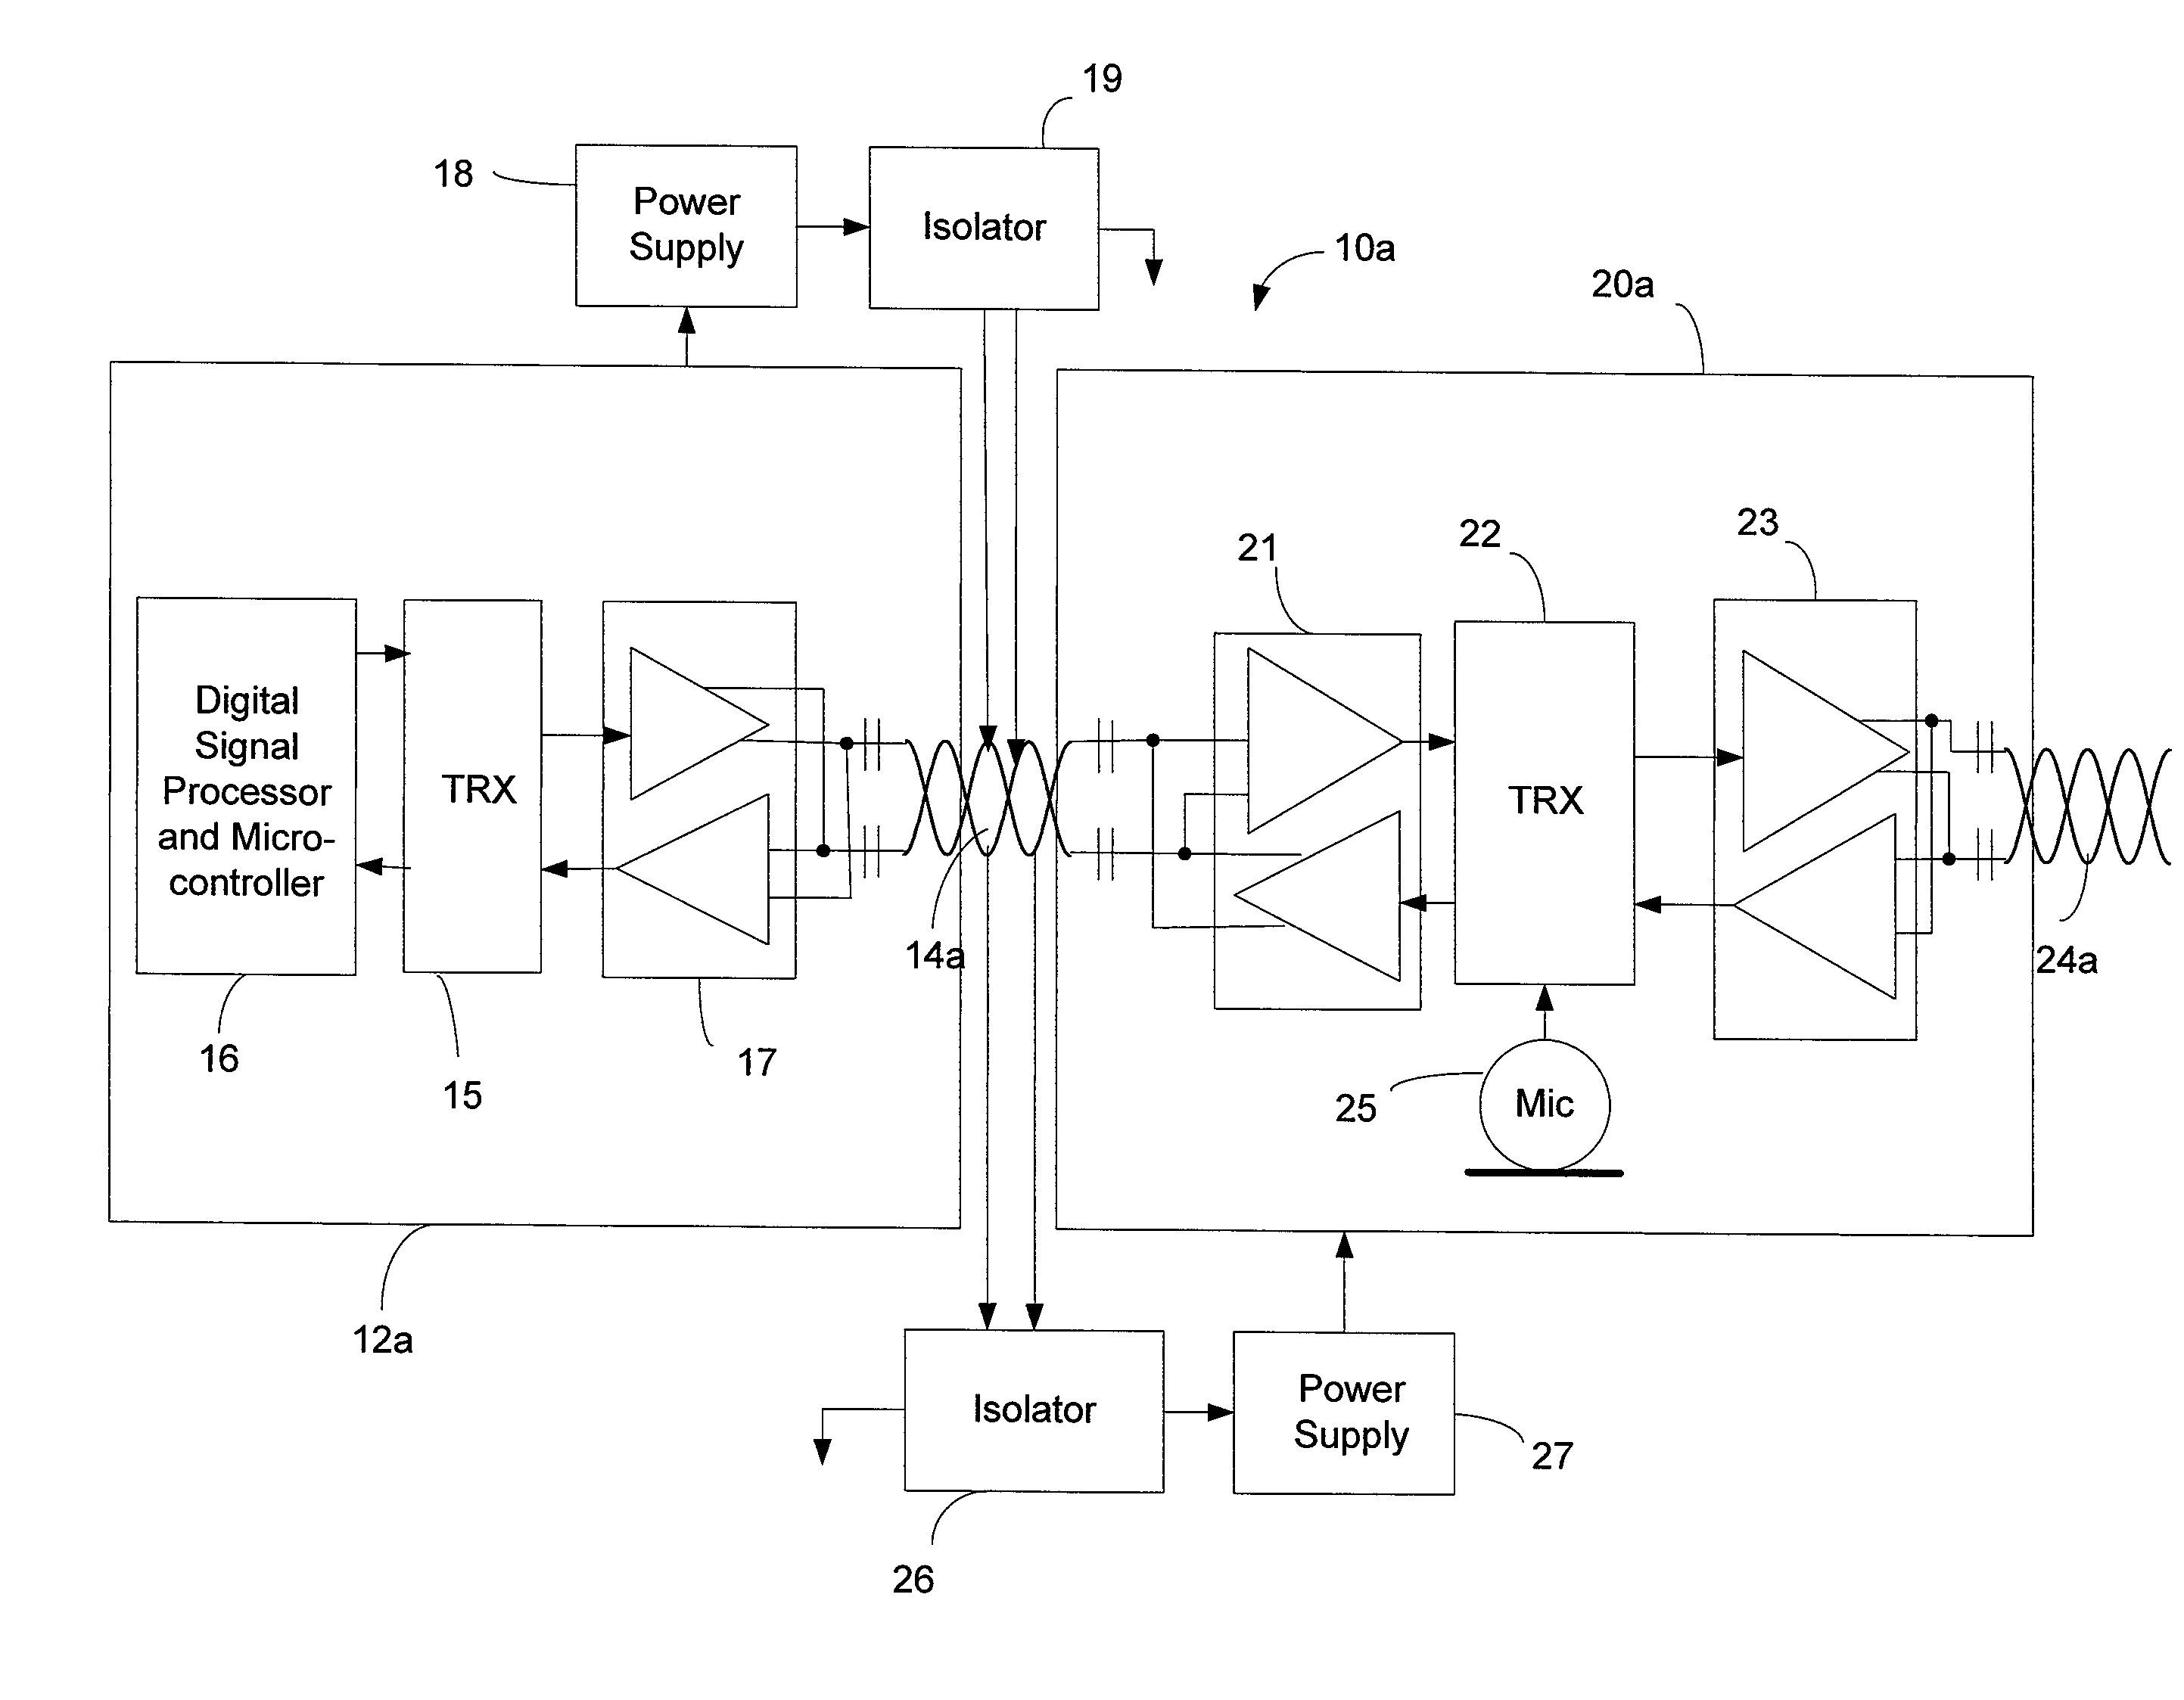 System for accomplishing bi-directional audio data and control communications